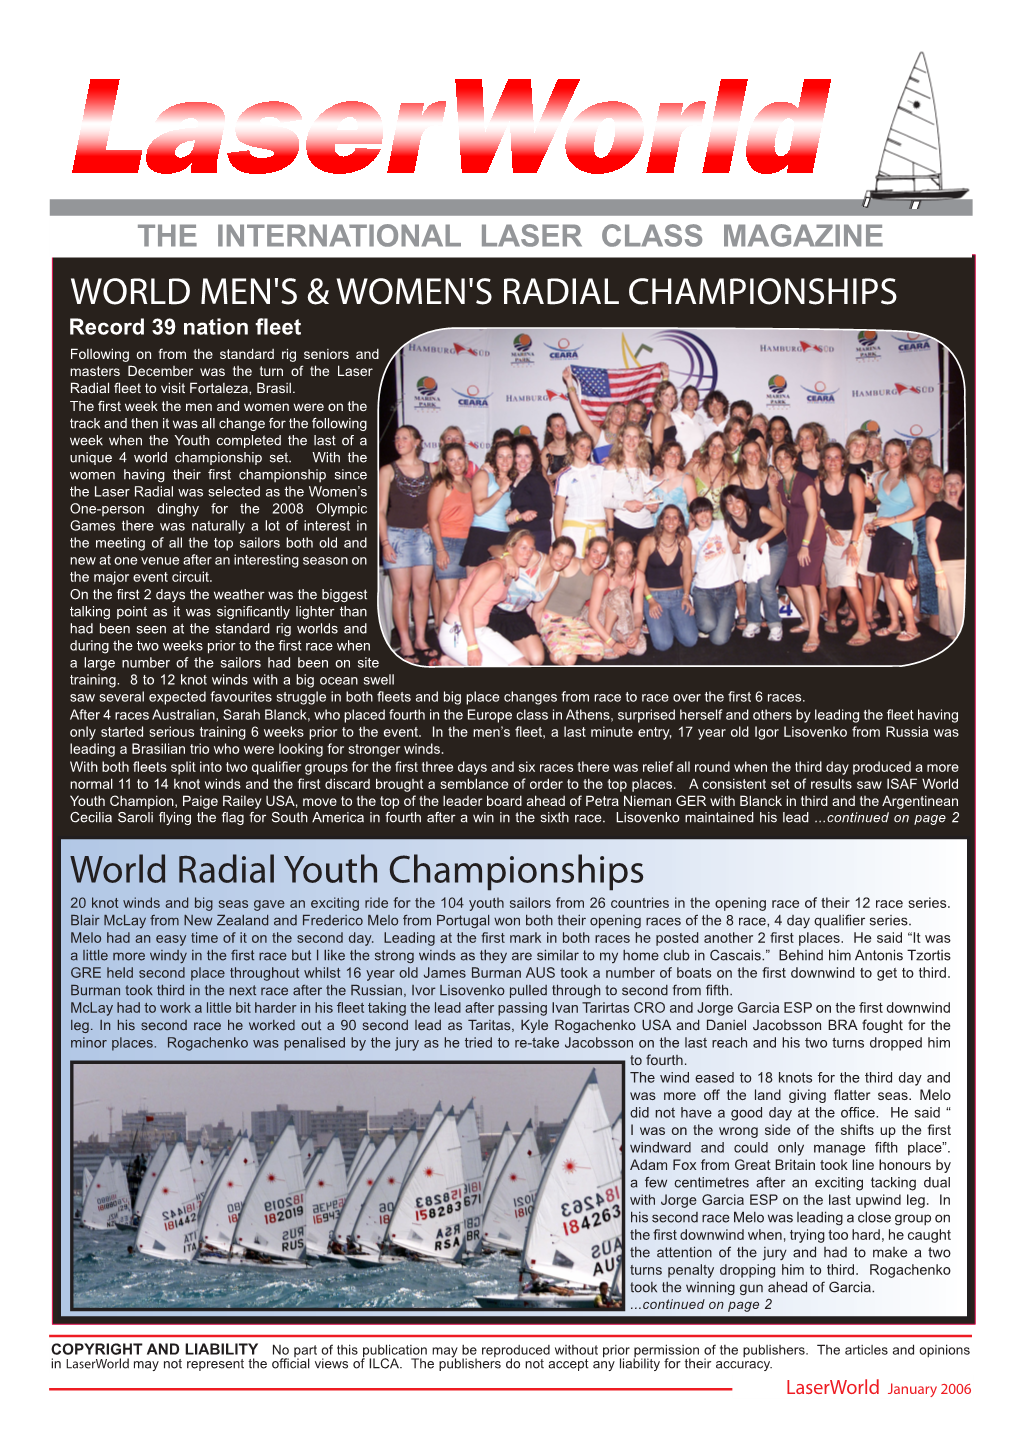 World Radial Youth Championships